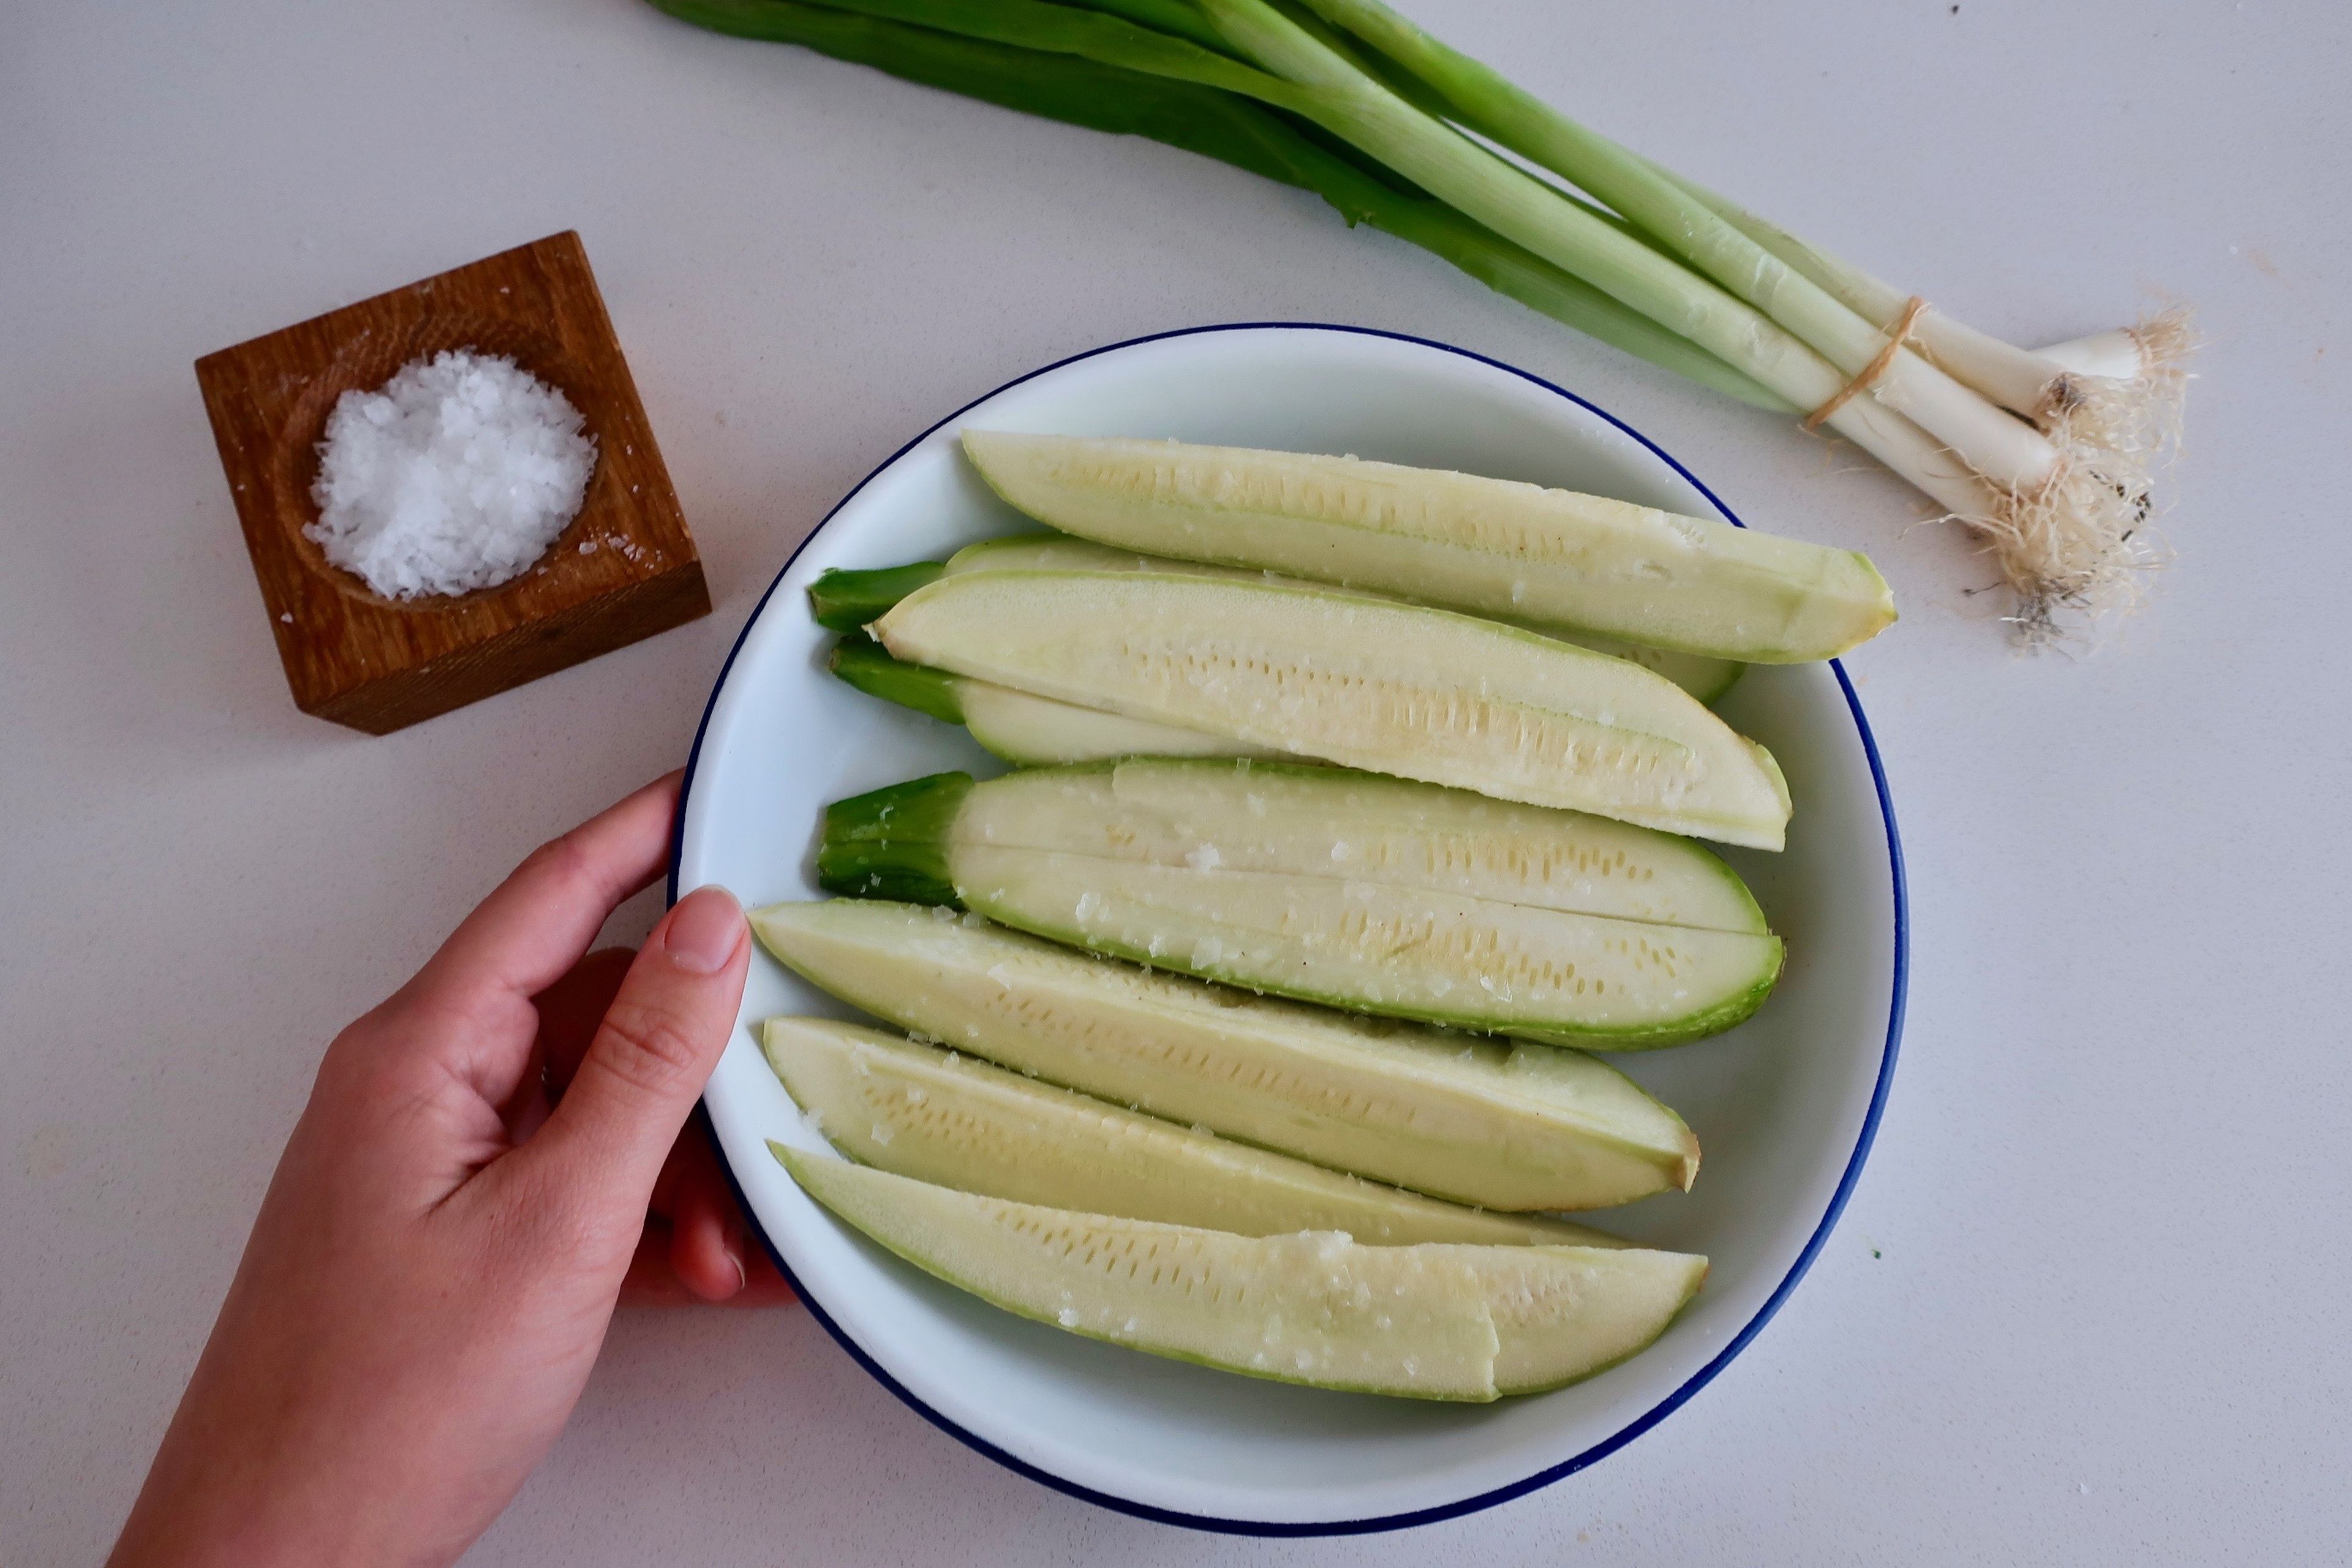 Slice zucchini lengthways. Place in a bowl and sprinkle generously with flaky sea salt to draw out water and season the zucchini. Leave for 15 - 30 min. Rinse and pat dry. Trim root end of the scallions. Transfer to a baking sheet along with the scallions, and two cloves of garlic, skin on. Make a glaze by mixing together the maple syrup and olive oil, plus a pinch of flaky sea salt. brush the zucchini and scallions with half the glaze. Grill in an oven on medium-high, turning as needed and brushing on more glaze. Remove the quicker-cooking scallions first when they are soft and browned. The zucchini will take approx 10 min. to cook and brown a little, depending on the strength of your grill.